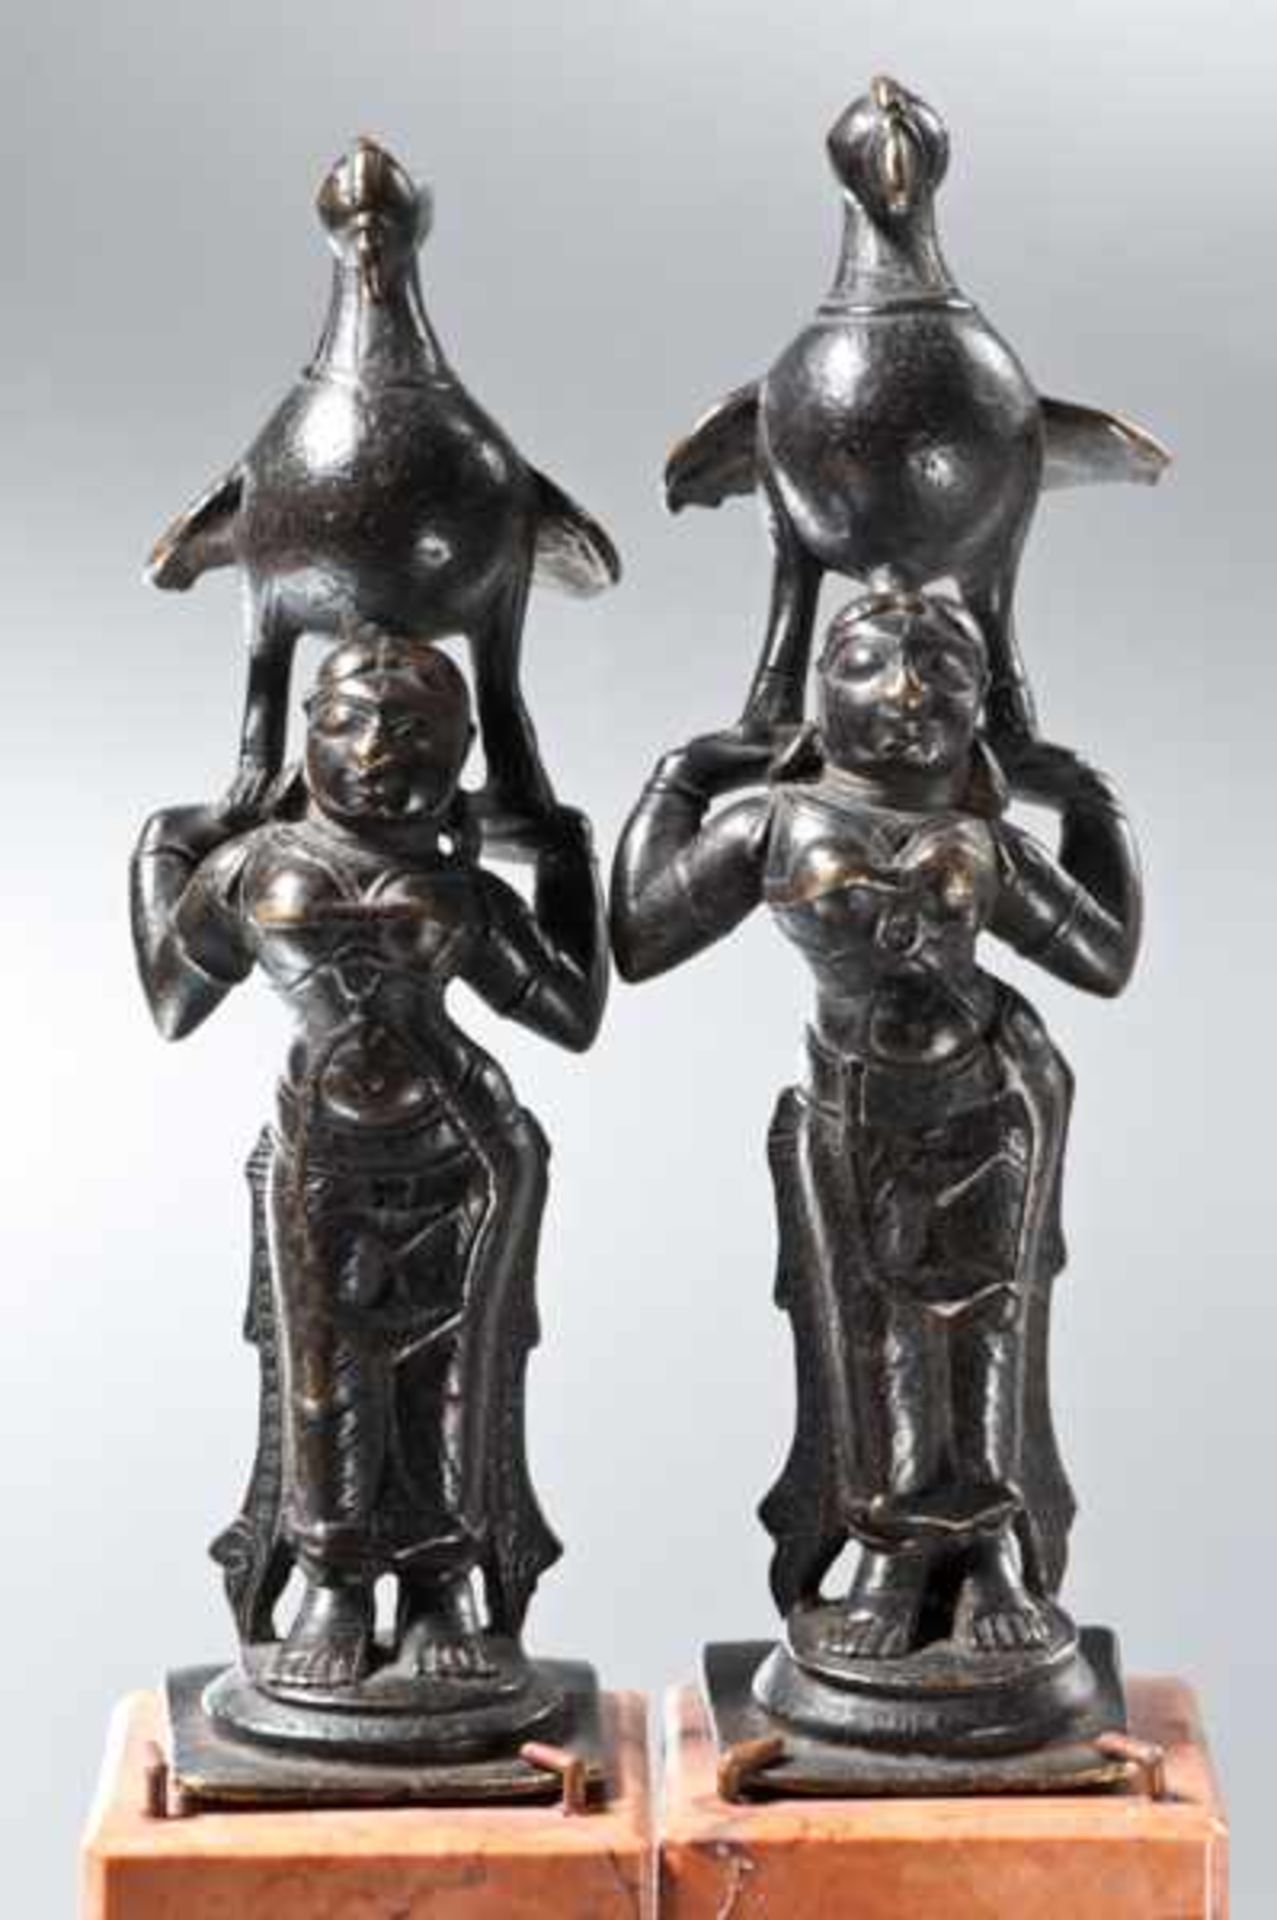 TWO SMALL, INDIAN BRONZES Bronze. Southern India, 19th cent.An unusual depiction of two young, - Image 7 of 7